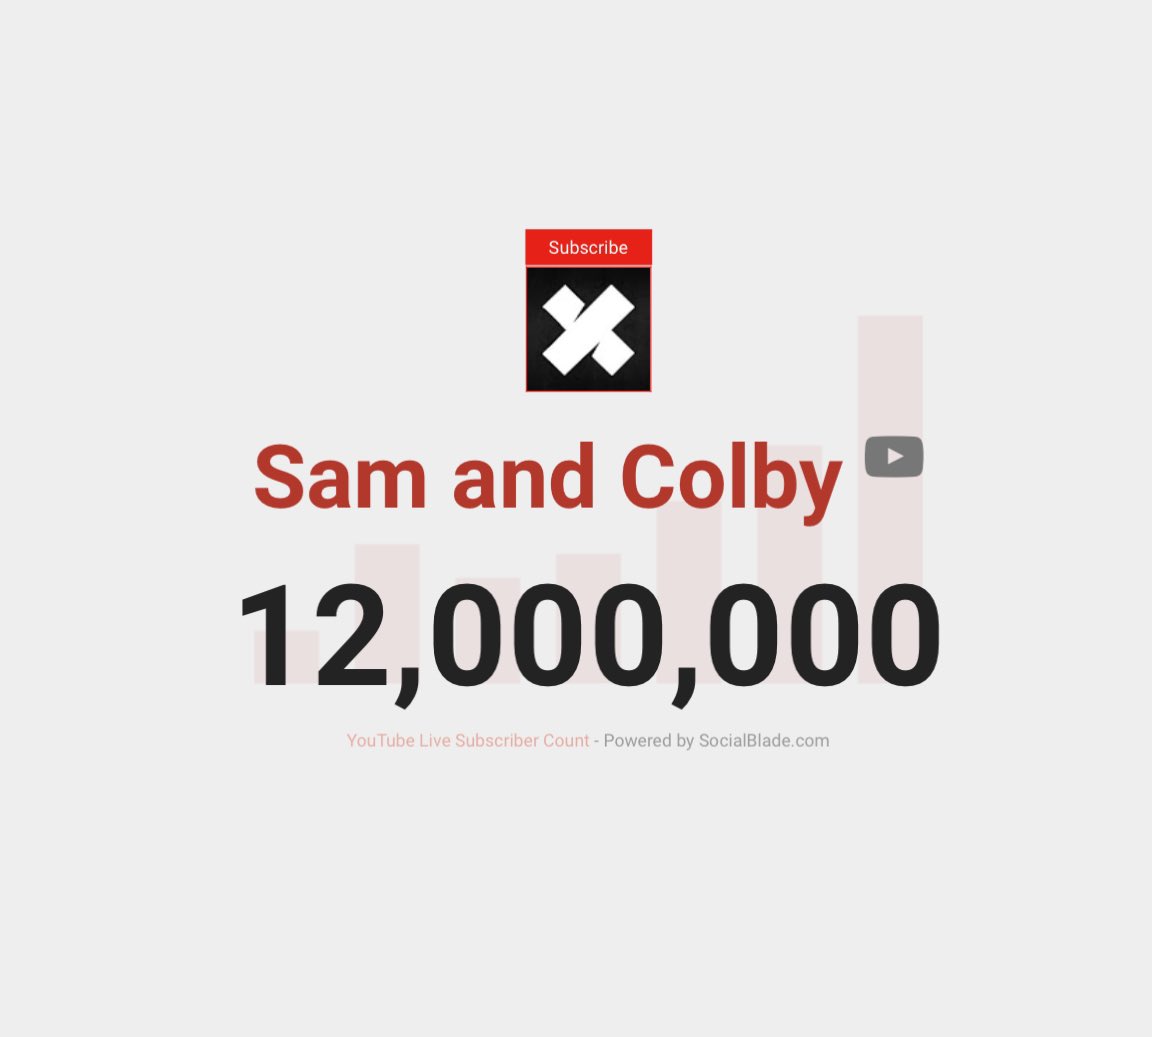 Sam & Colby hit 12 MILLION SUBSCRIBERS 🥳🥂